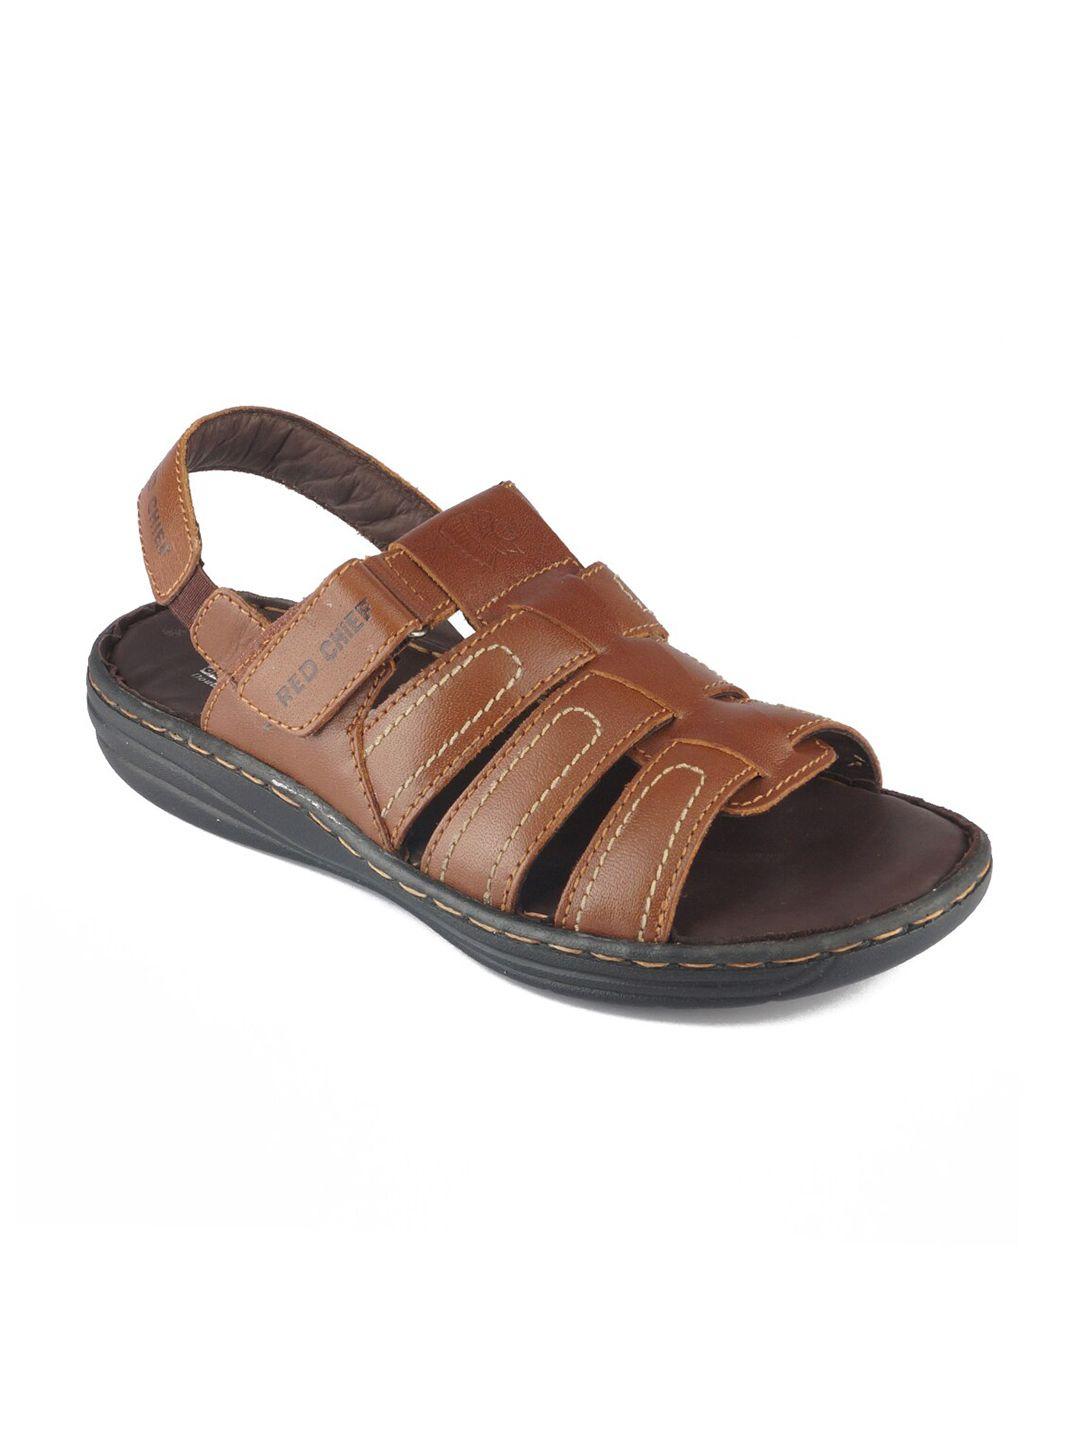 red-chief-men-brown-&-black-leather-comfort-sandals